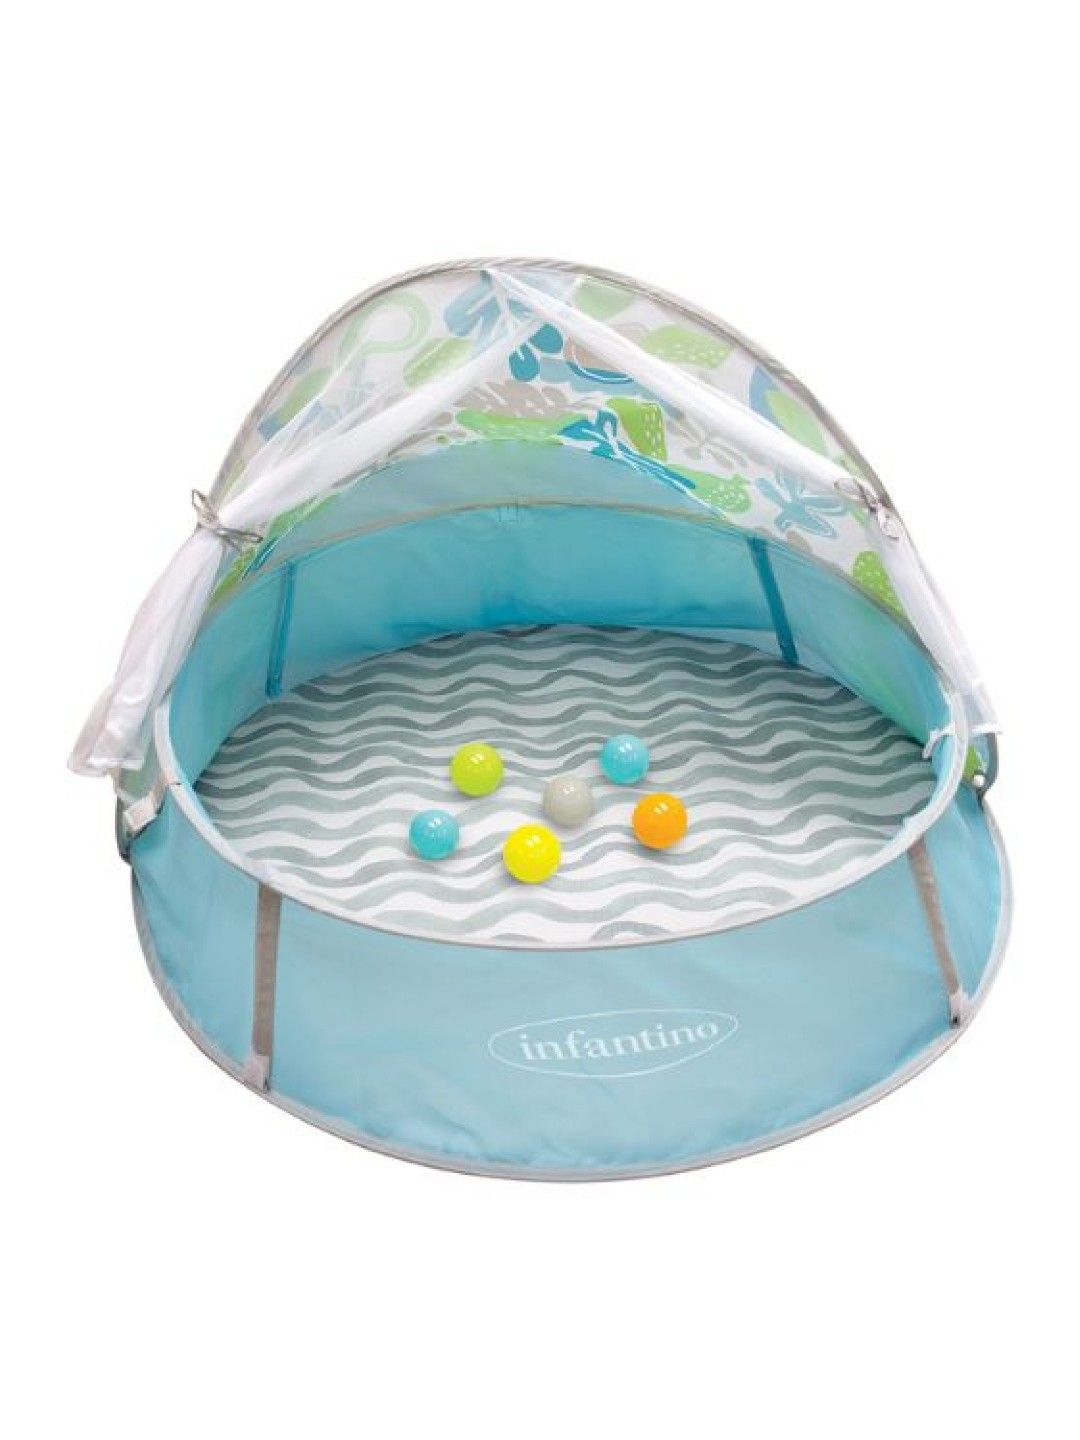 Infantino Grow with me 3-in-1 Pop-up Play Ball Pit